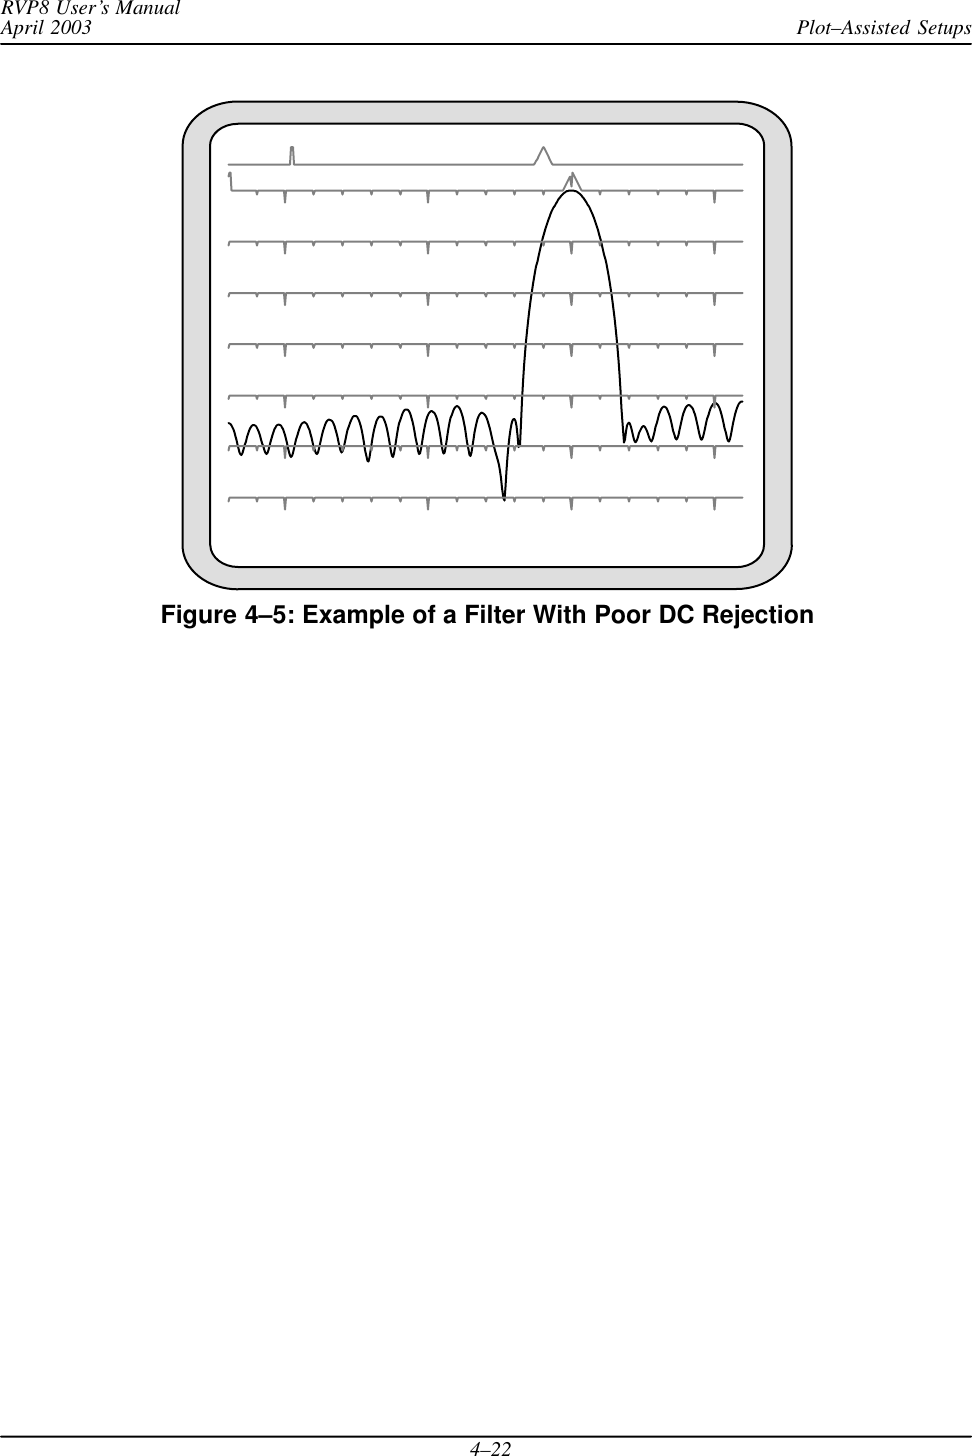 Plot–Assisted SetupsRVP8 User’s ManualApril 20034–22Figure 4–5: Example of a Filter With Poor DC Rejection